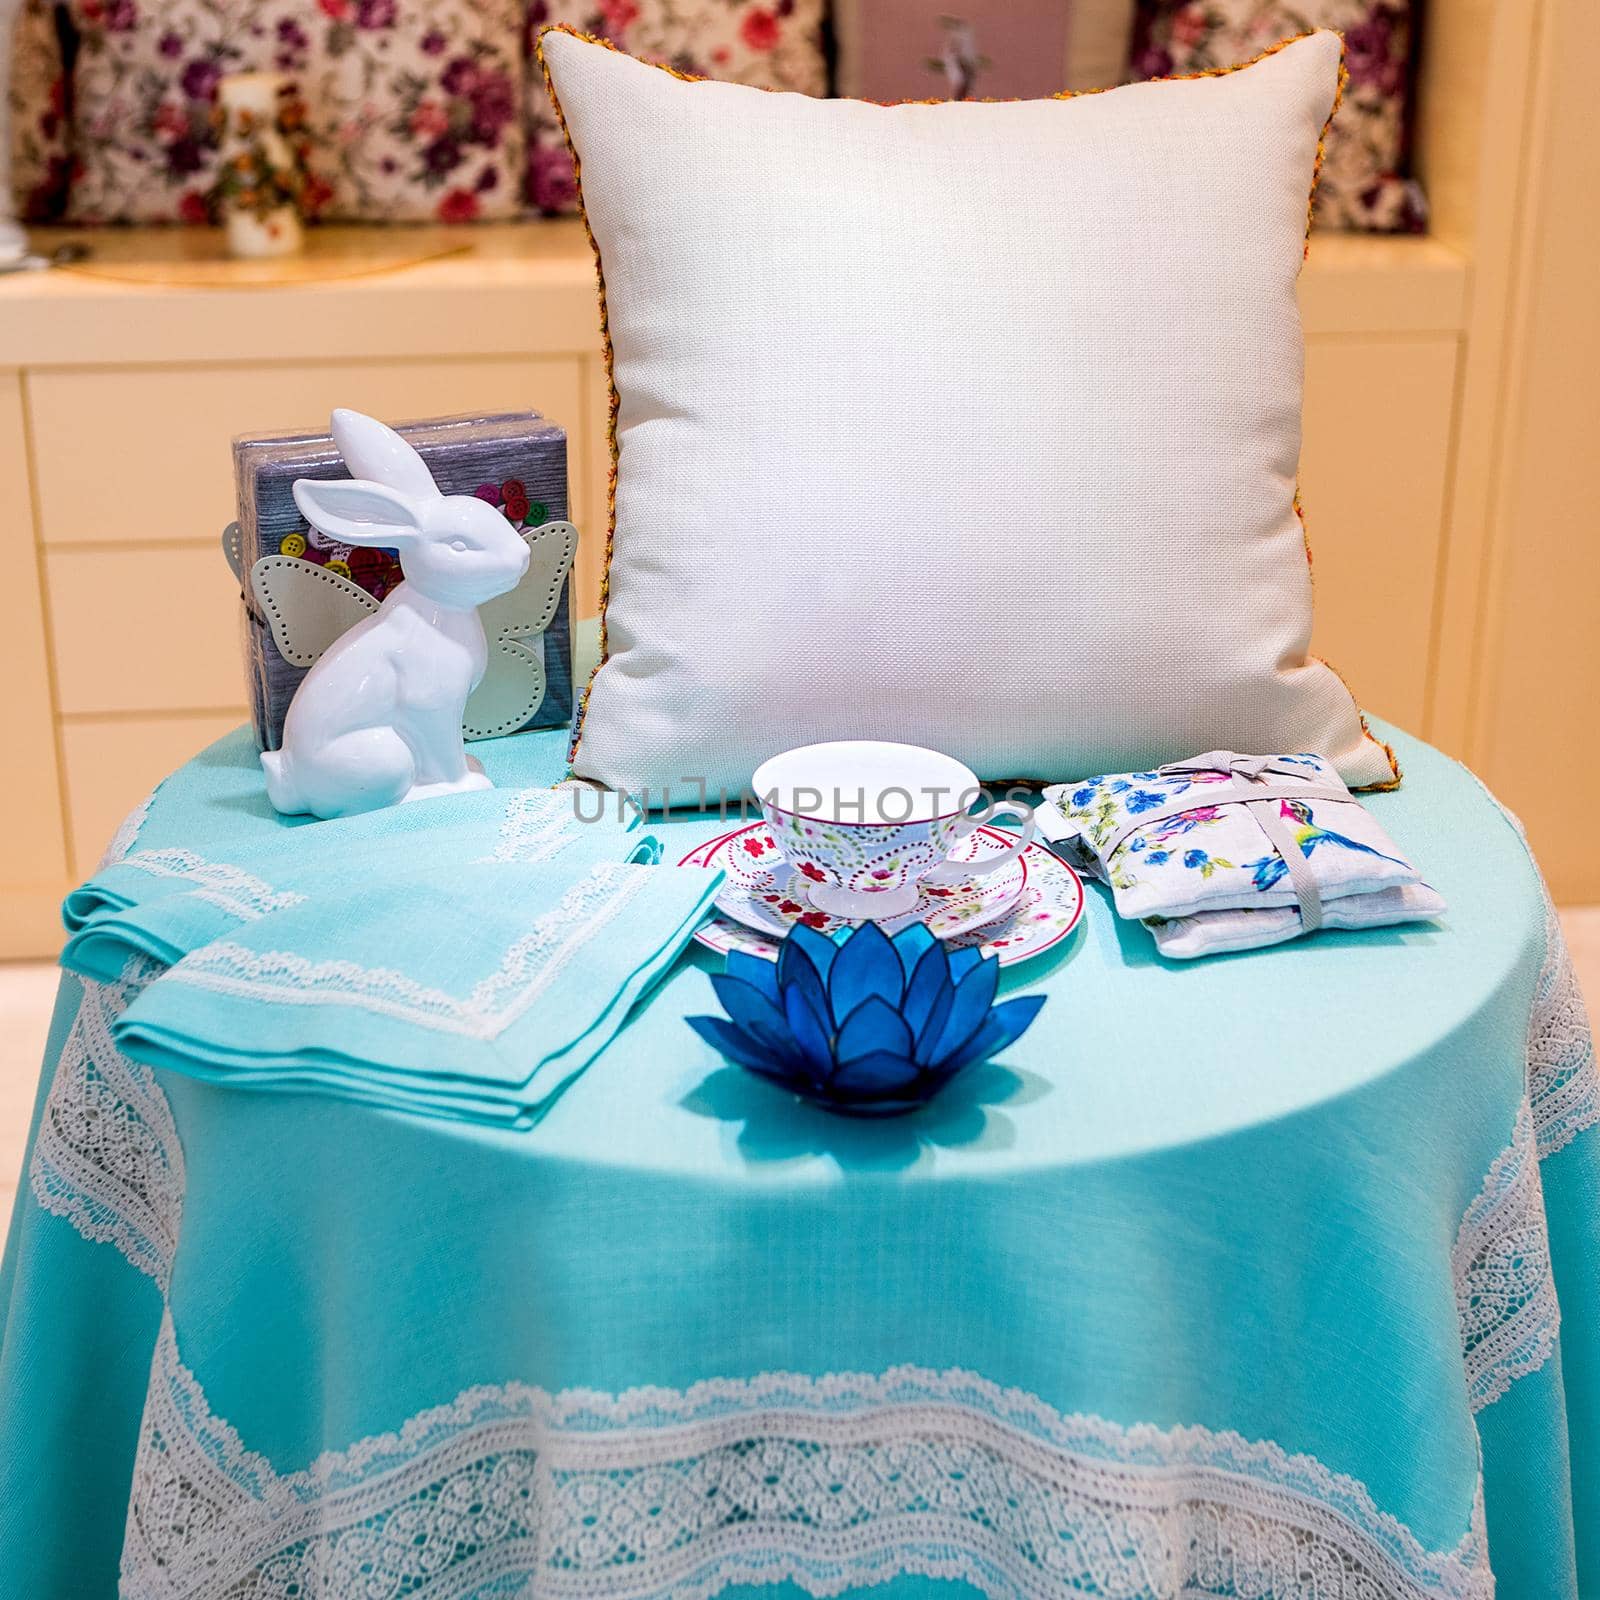 Blue set of pillow and blanket cup isolated